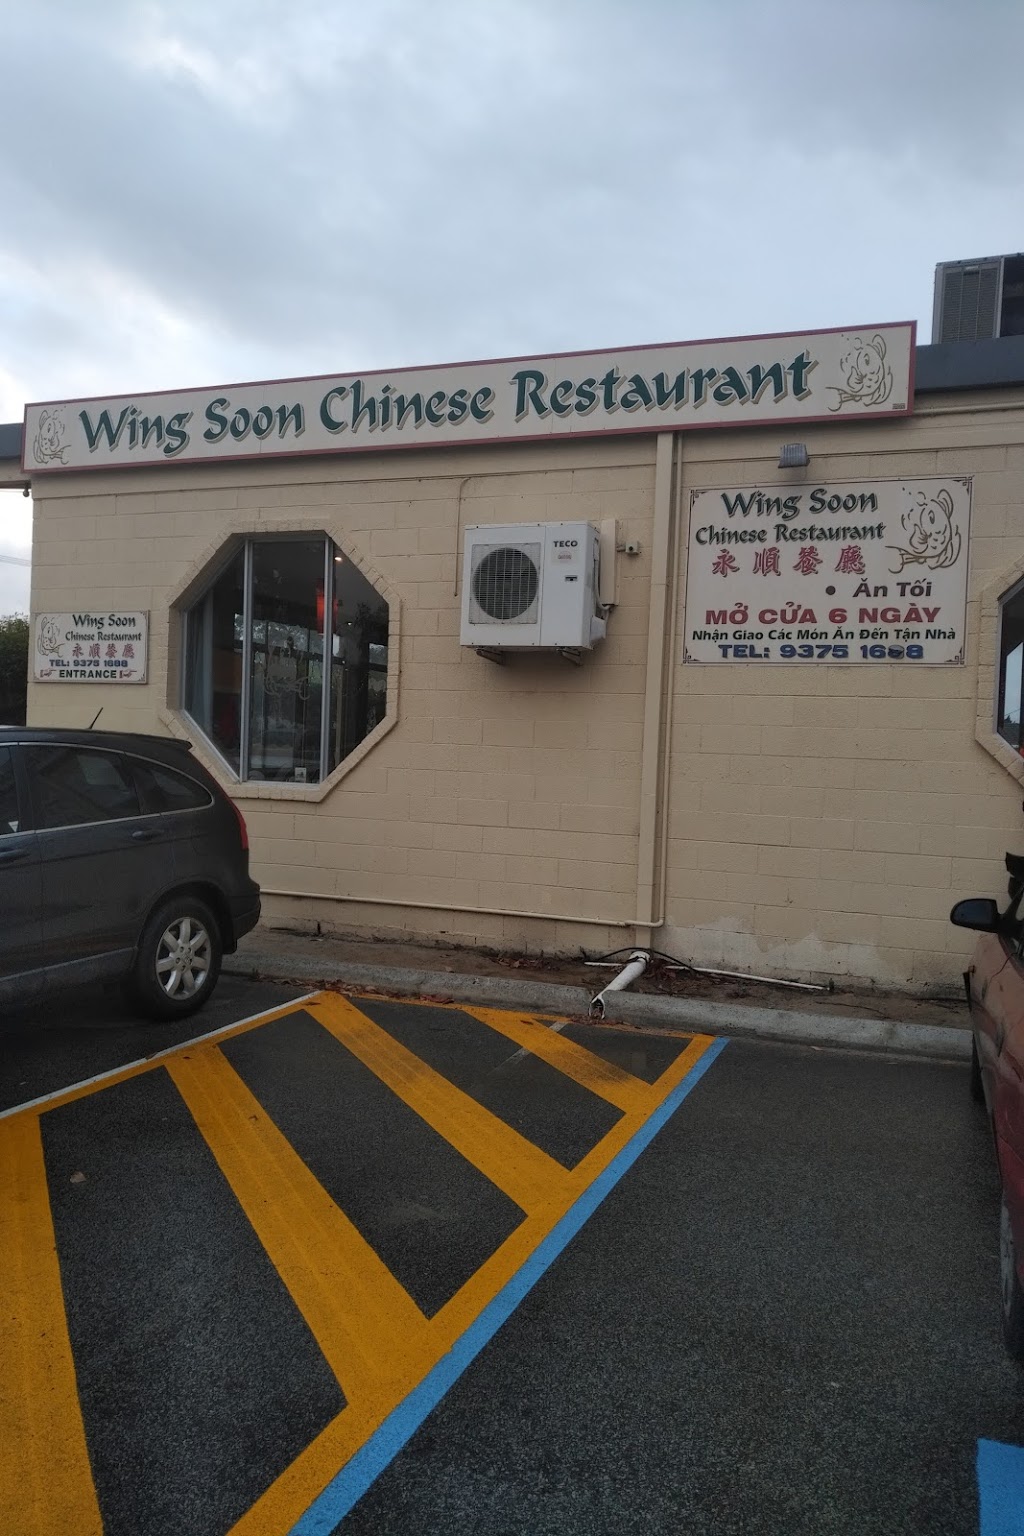 Wing Soon Chinese Restaurant | restaurant | 2/69 Lincoln Rd, Morley WA 6062, Australia | 0893751688 OR +61 8 9375 1688